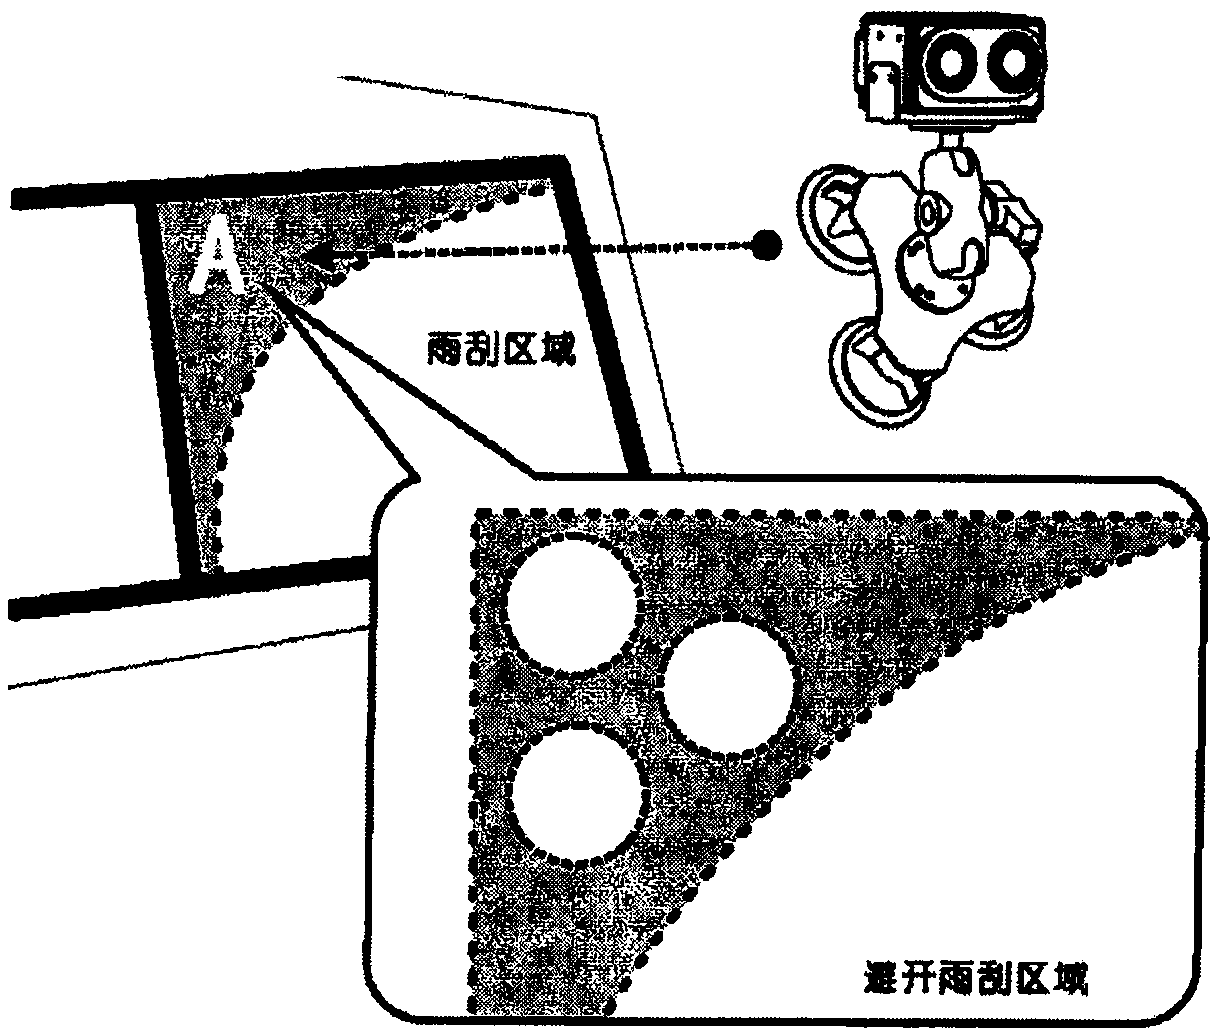 Mounting method of military vehicle-mounted auxiliary night-vision device system